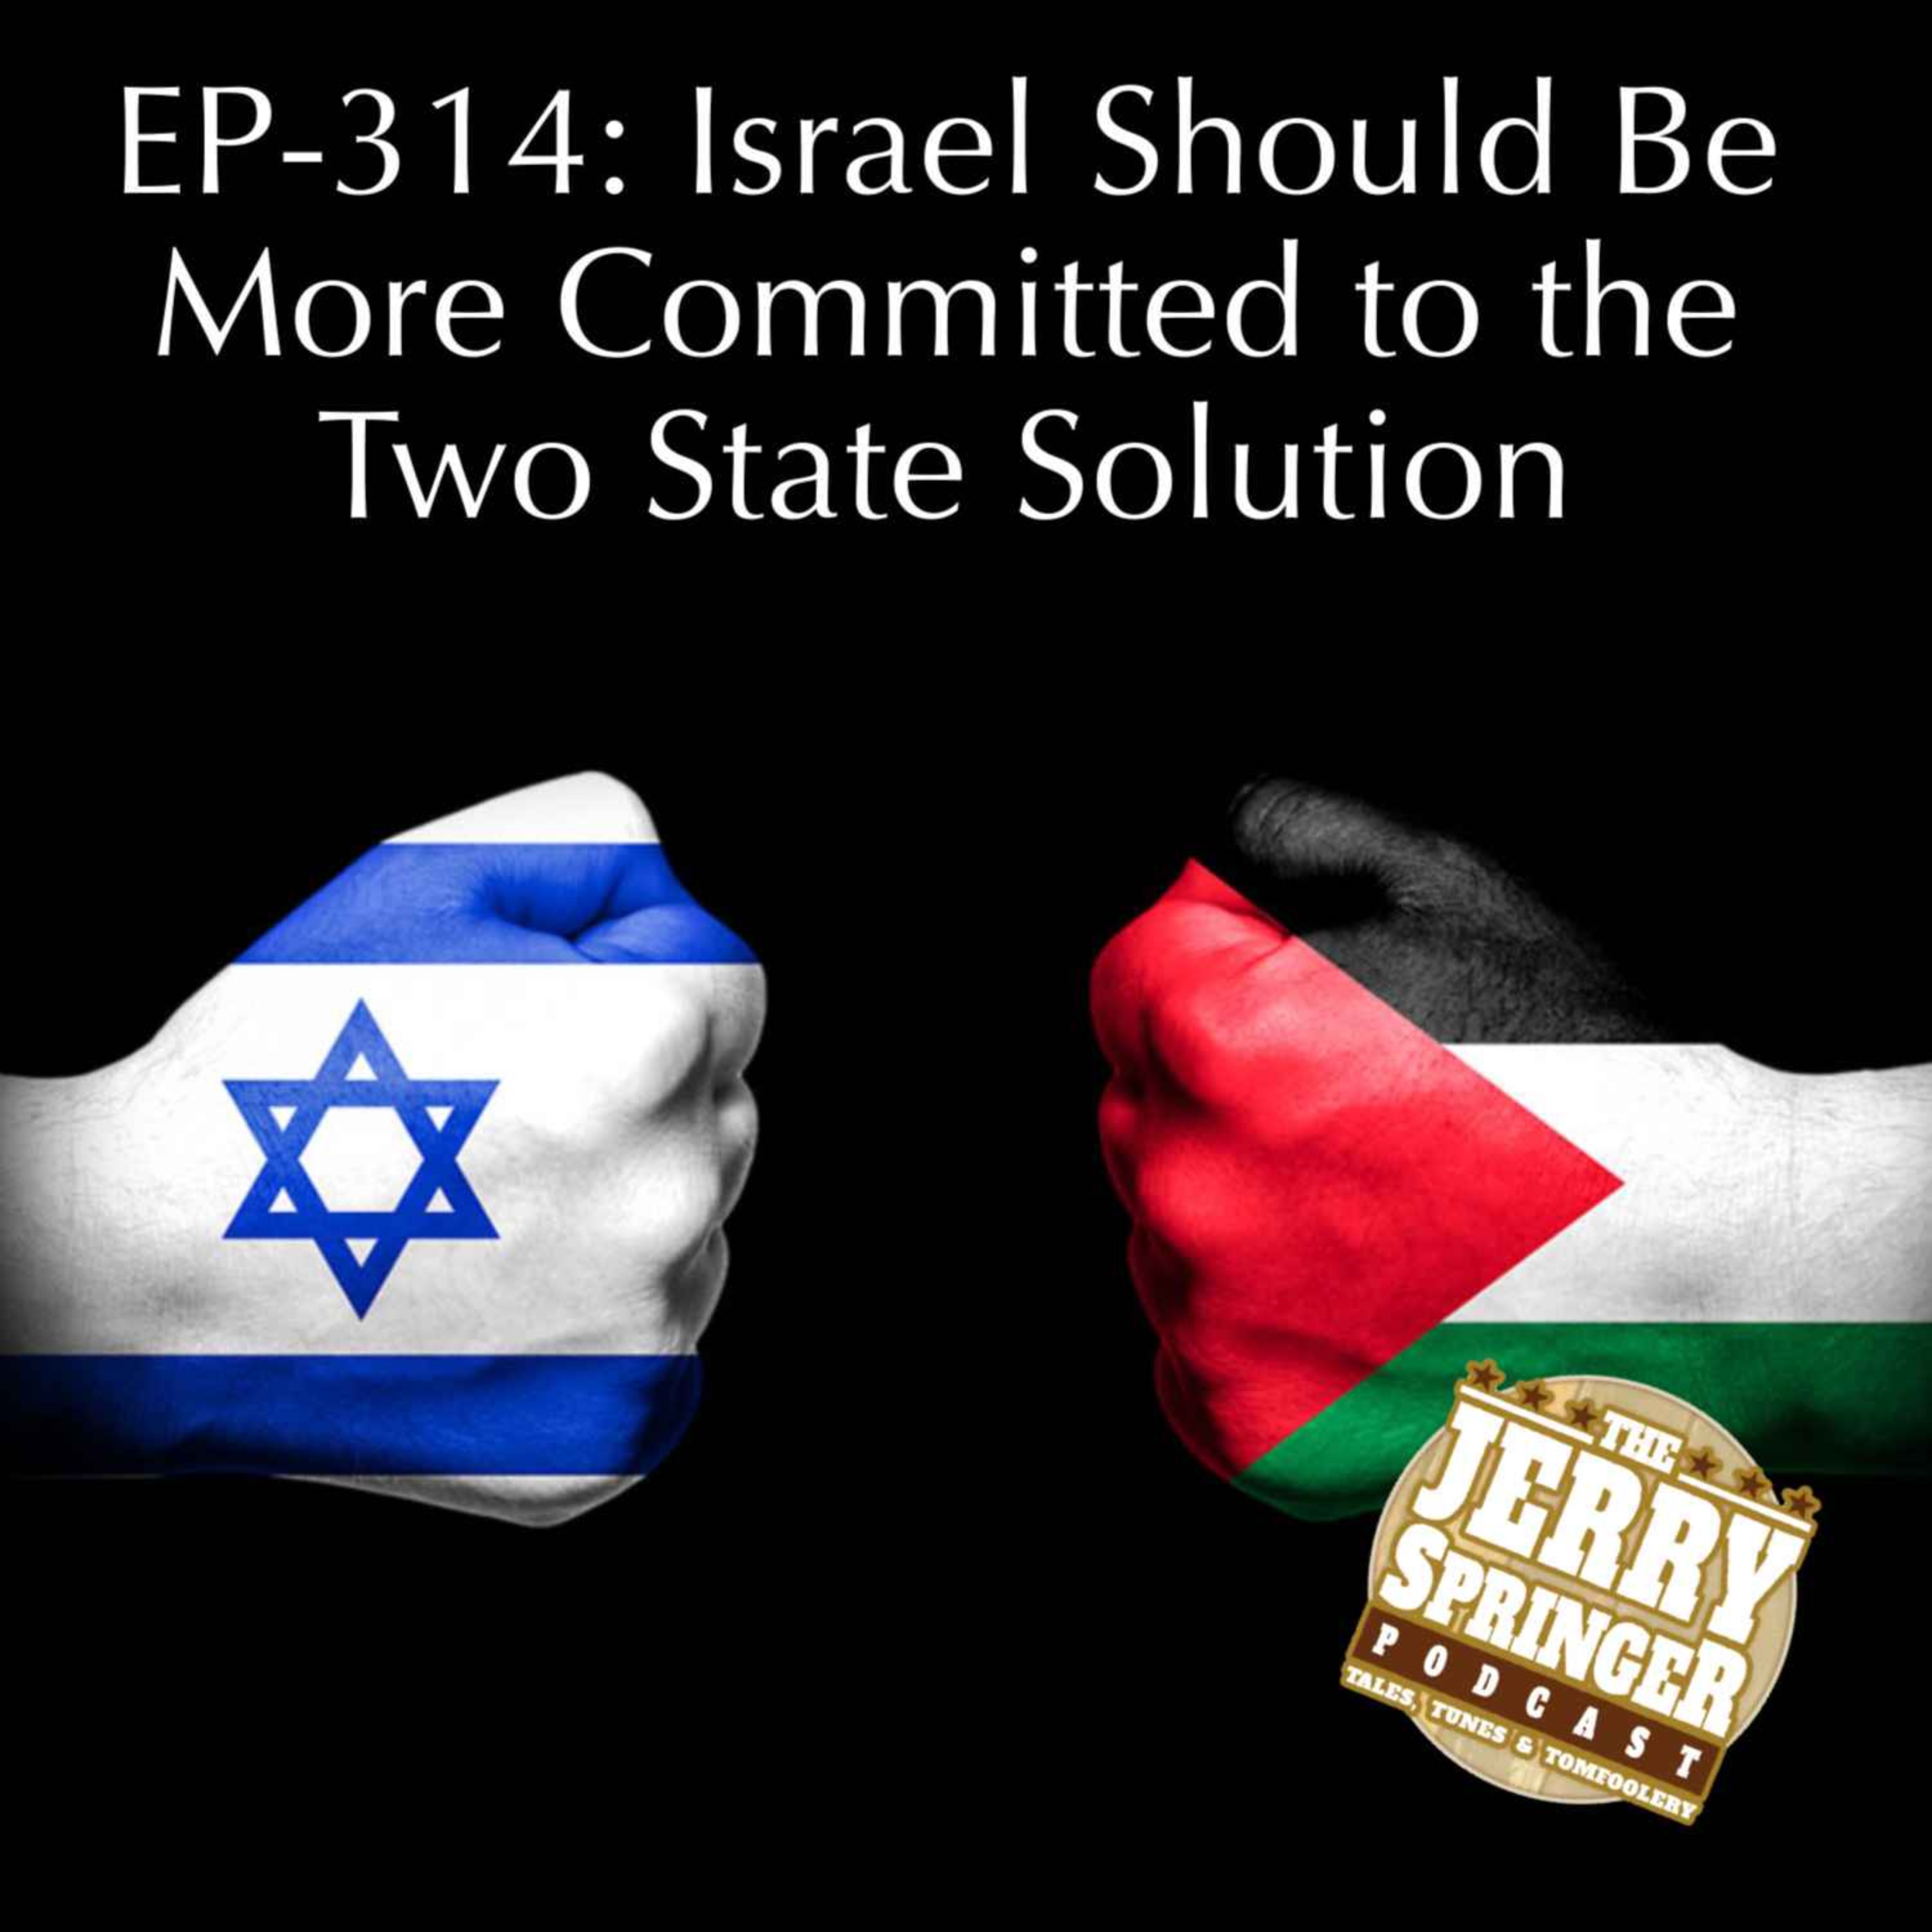 Israel Should Be More Committed to the Two State Solution: EP-314